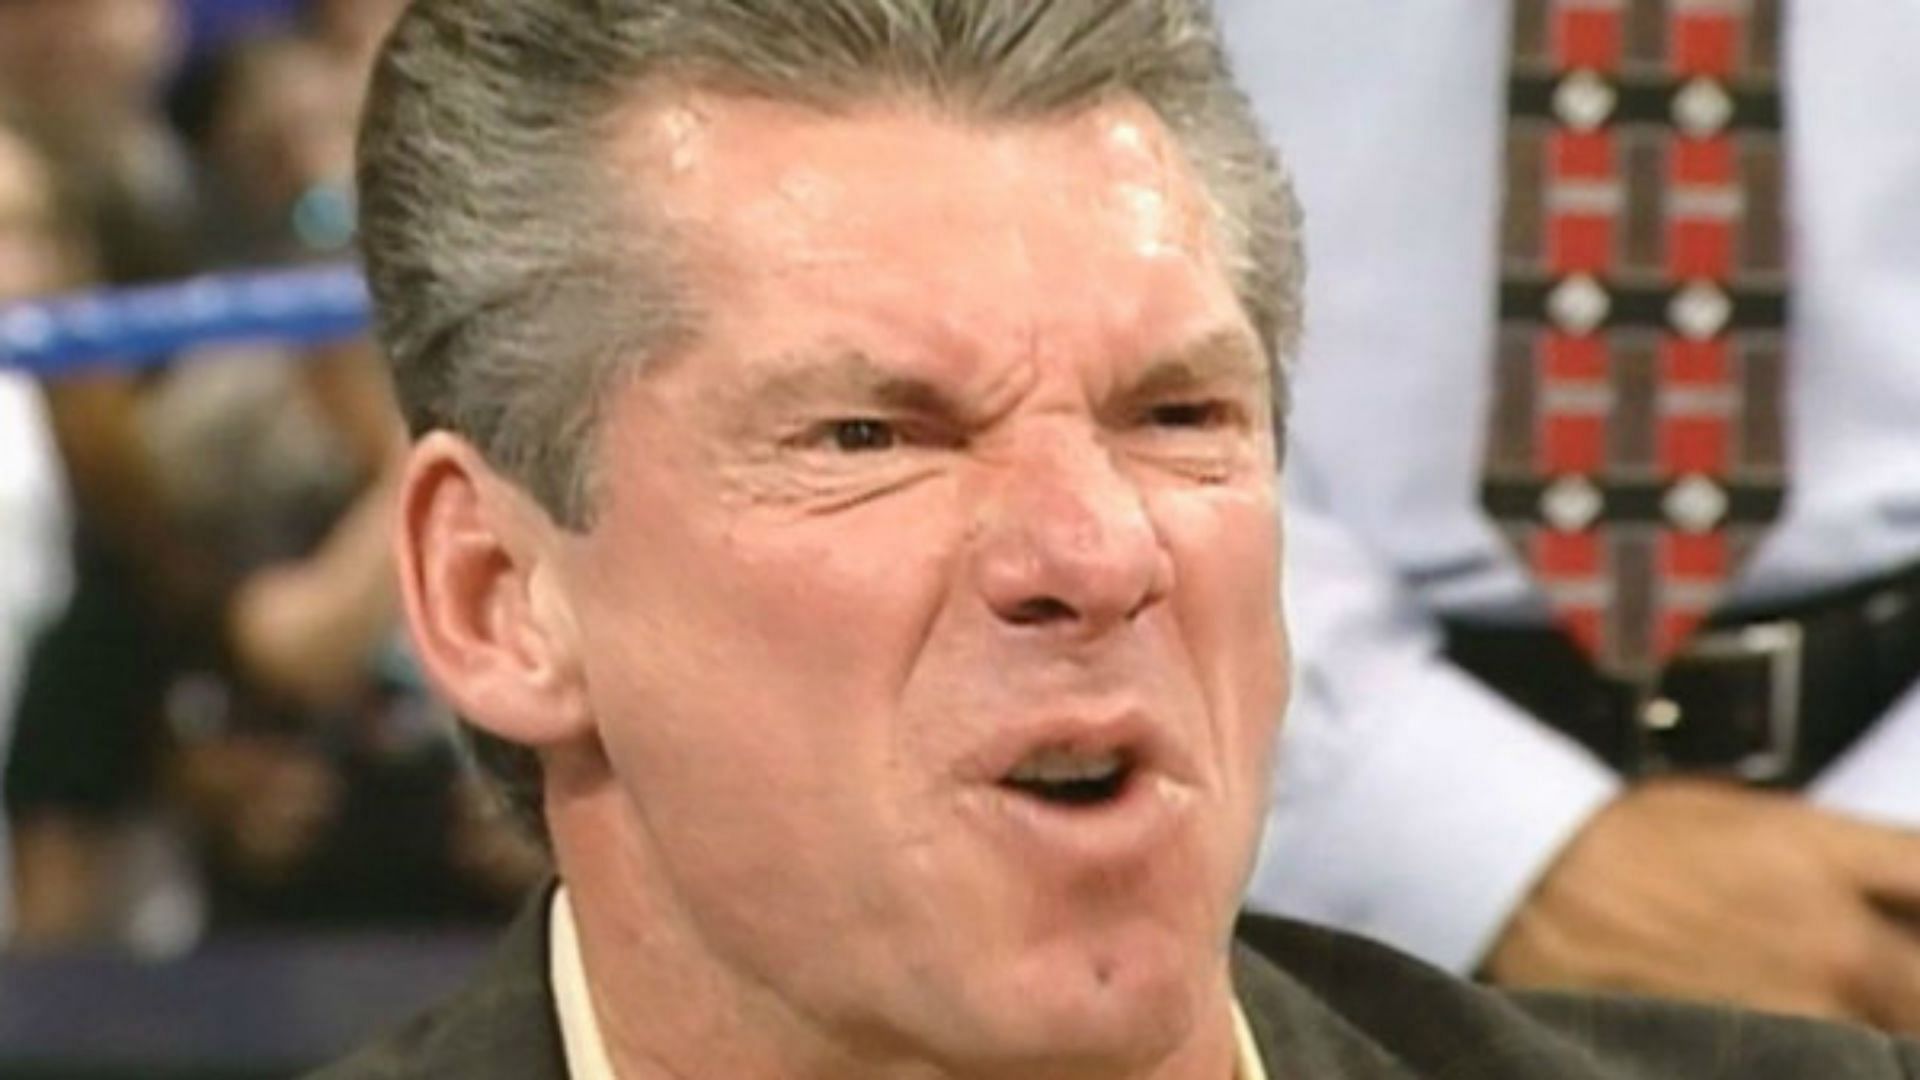 How did this WWE legend annoy Vince McMahon?